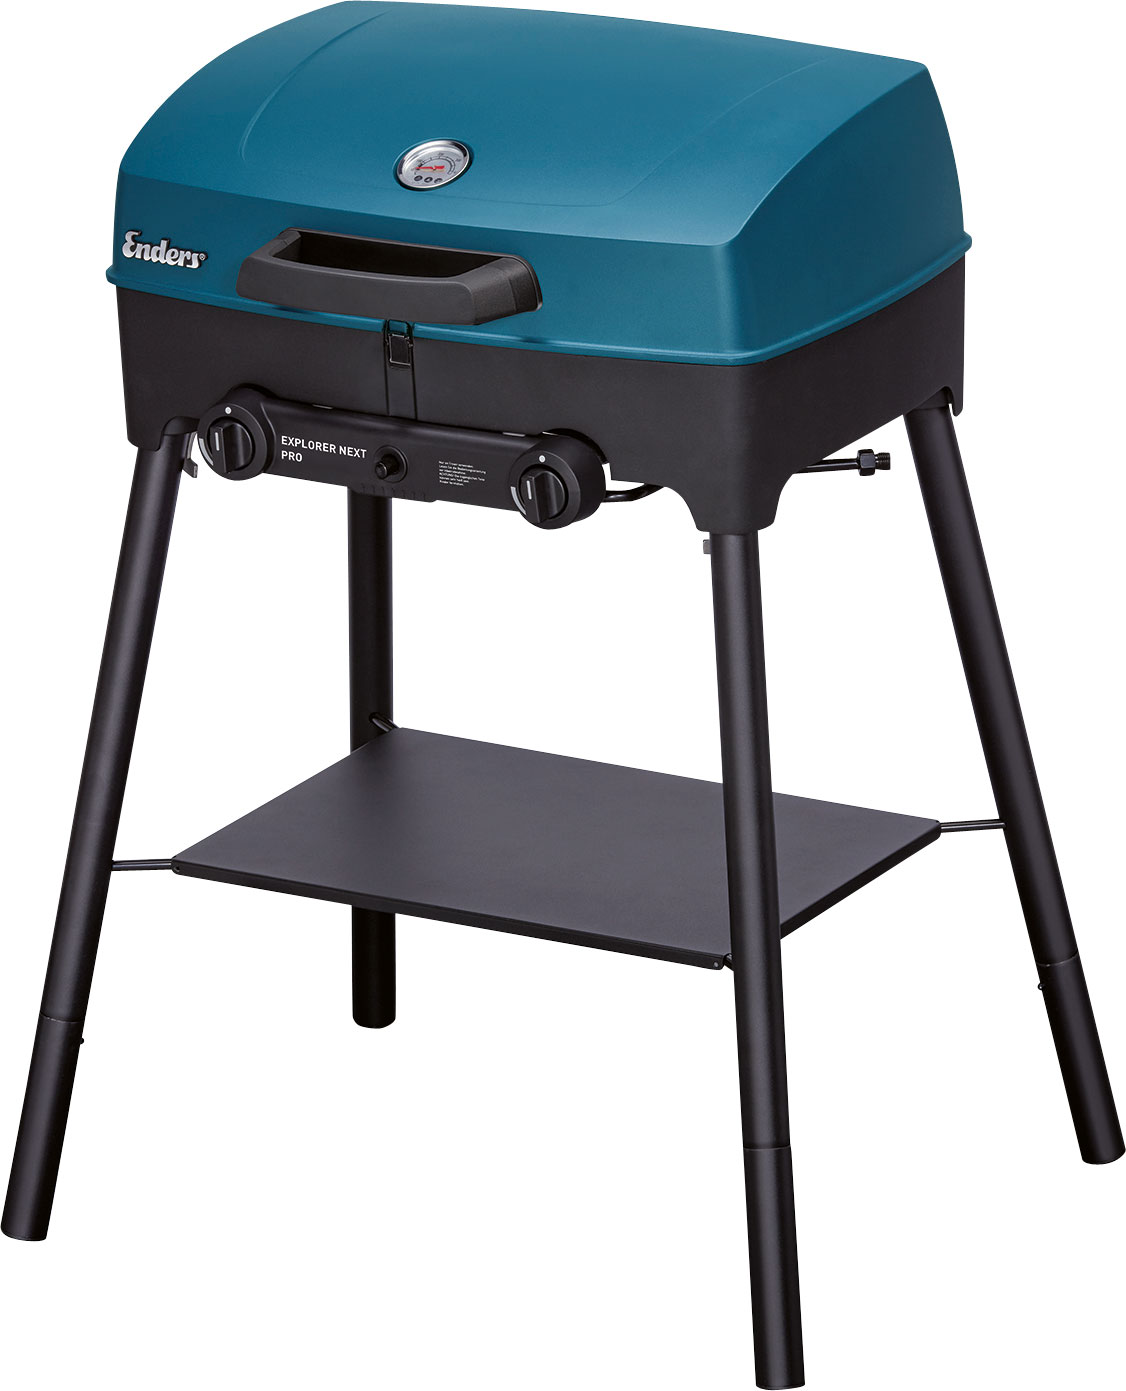 marketing Inactief fout Enders Explorer Next Pro Gas Grill - Berger Camping